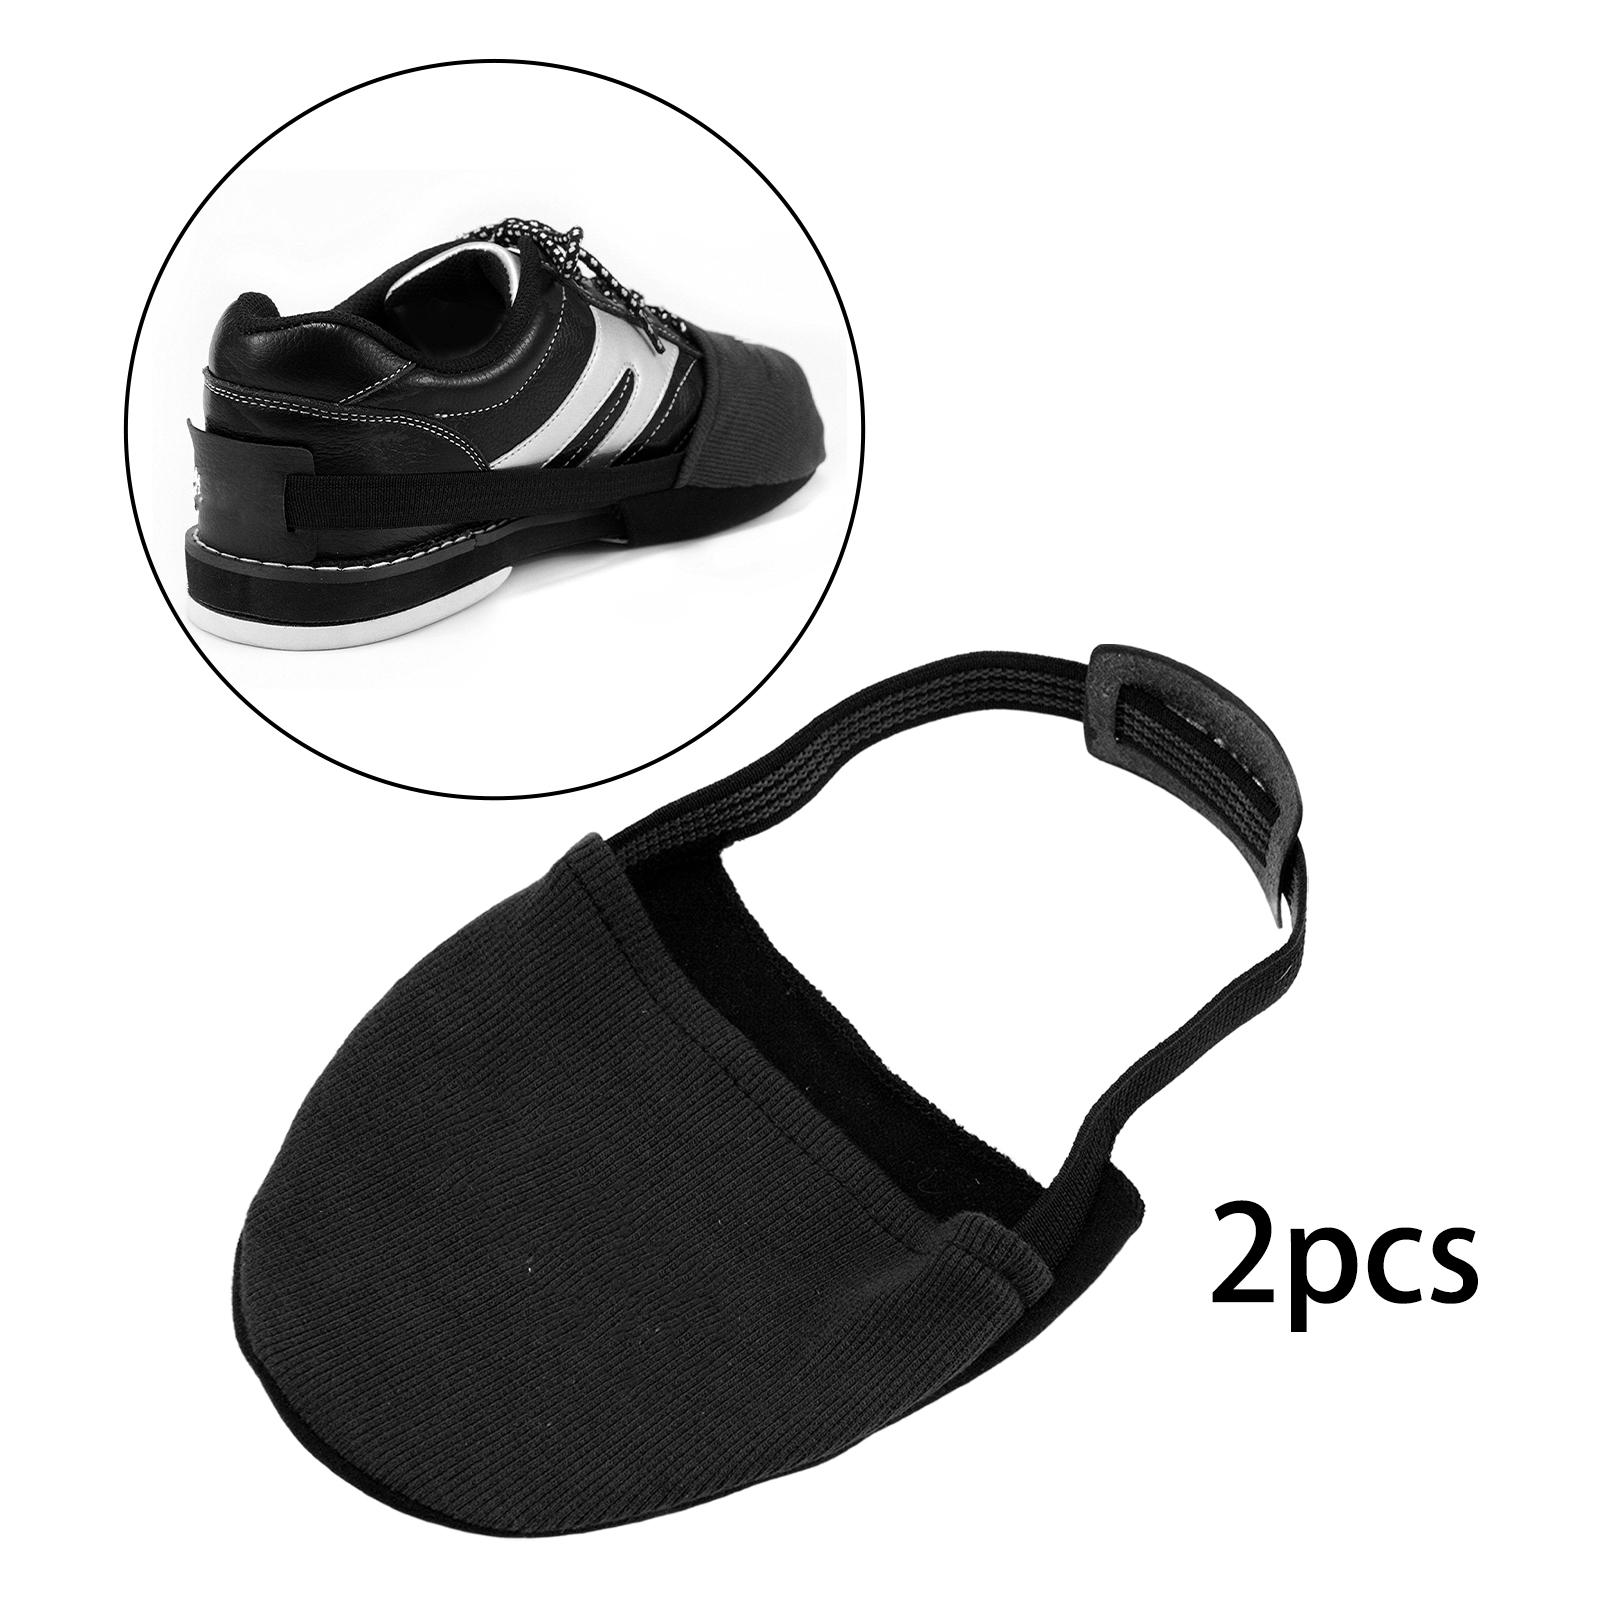 Bowling Shoe Cover Shoe Protector Wear Resistant Thick for Kids Teams